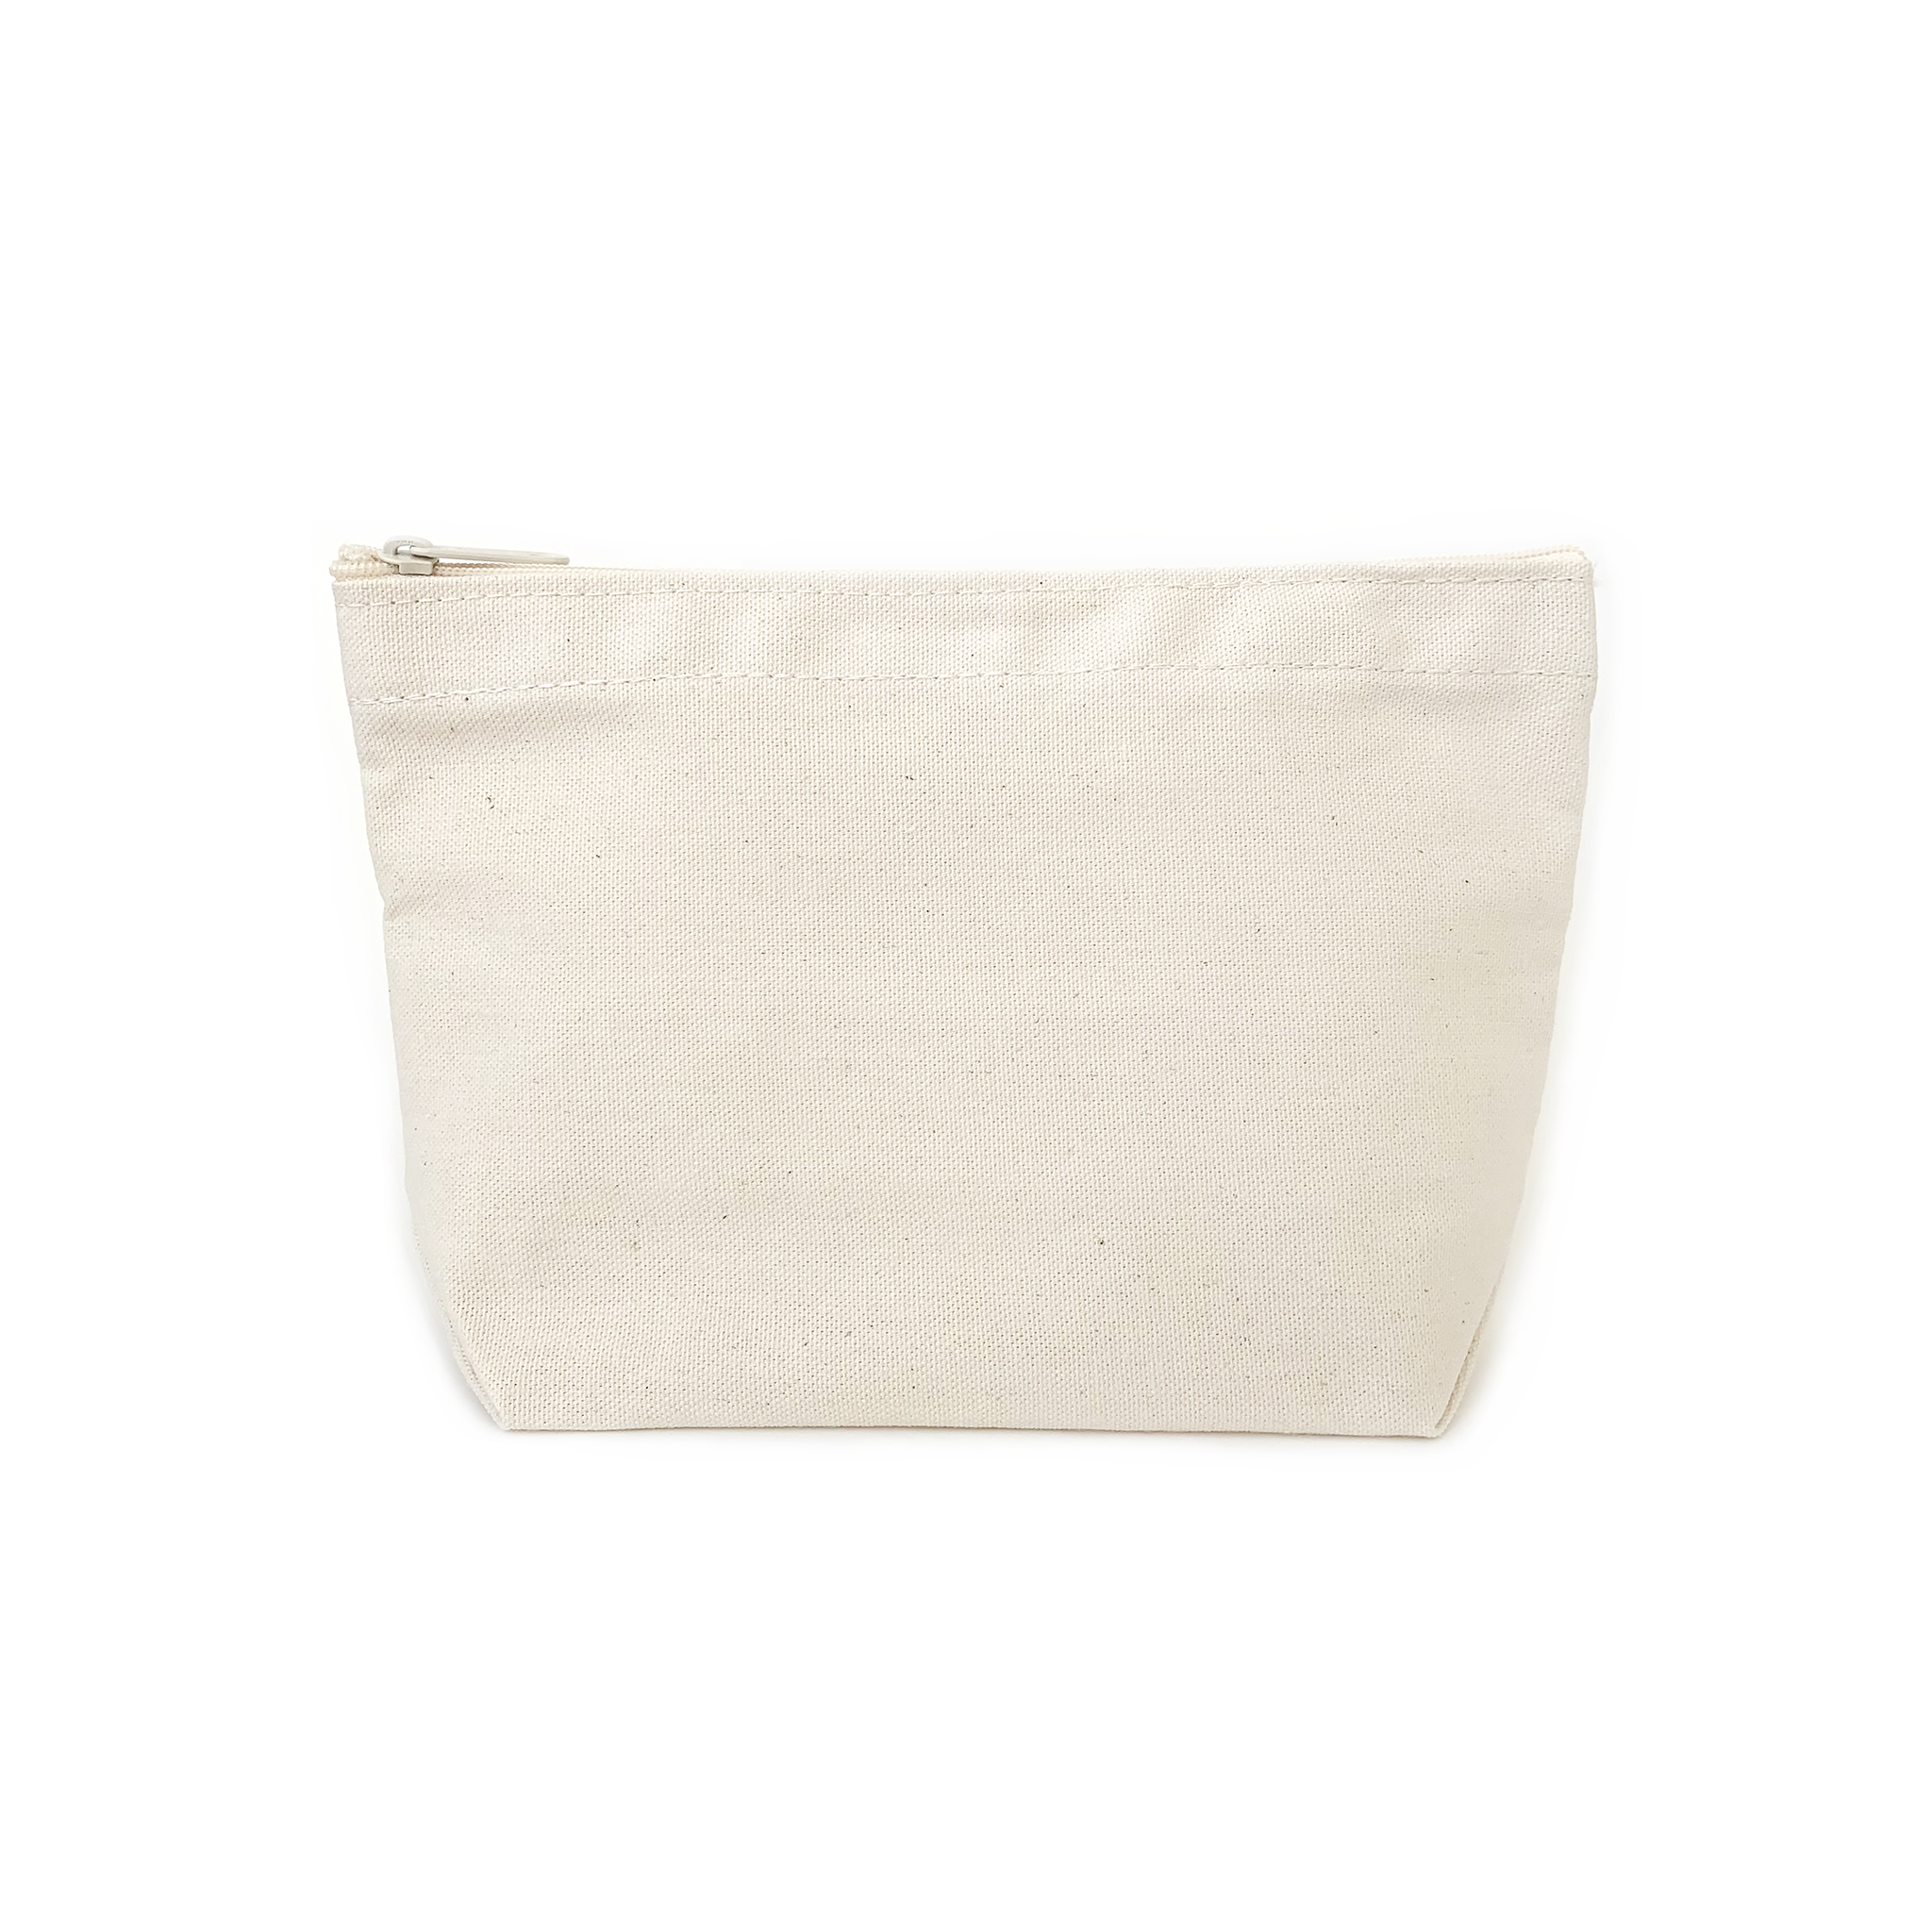 Zip Pouches Blank | Buy Blanks for DIY Gifts Online | Moko